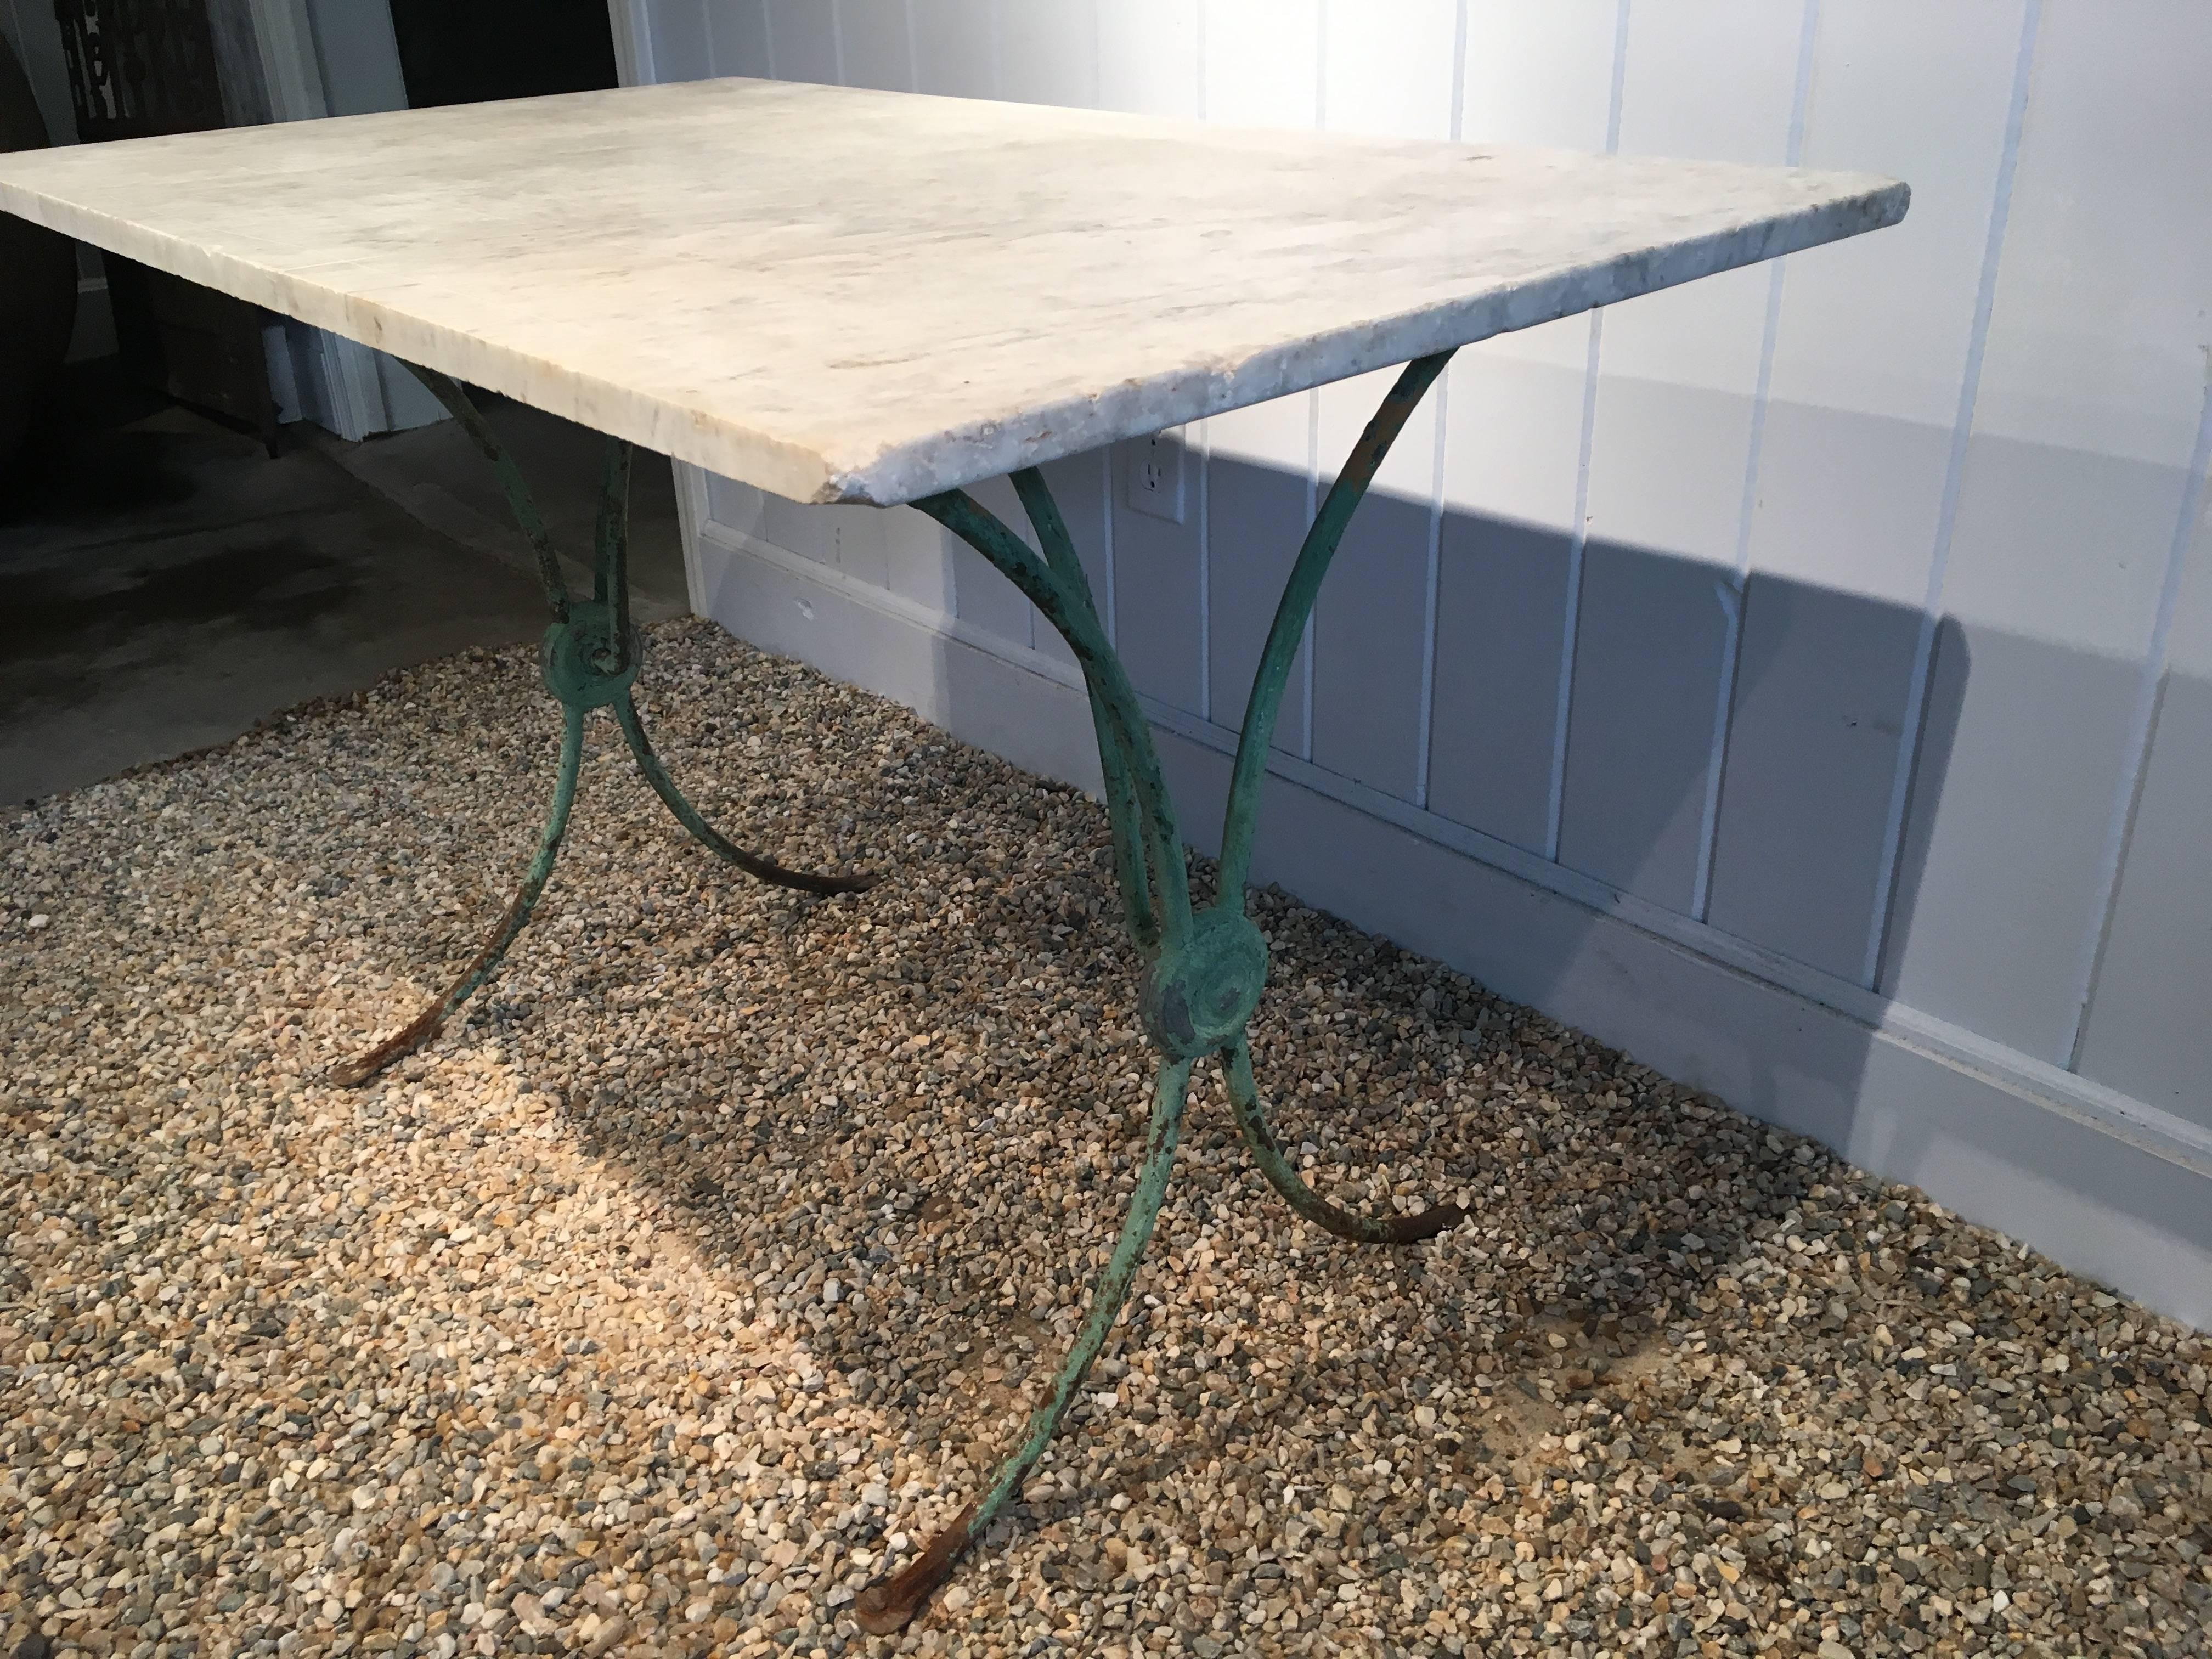 It is rare to find such a beautiful table in wrought iron with sweeping legs and center medallions on each side, and this one is a beauty, sporting old green paint in a lovely color. The marble top is antique and, while in very good condition